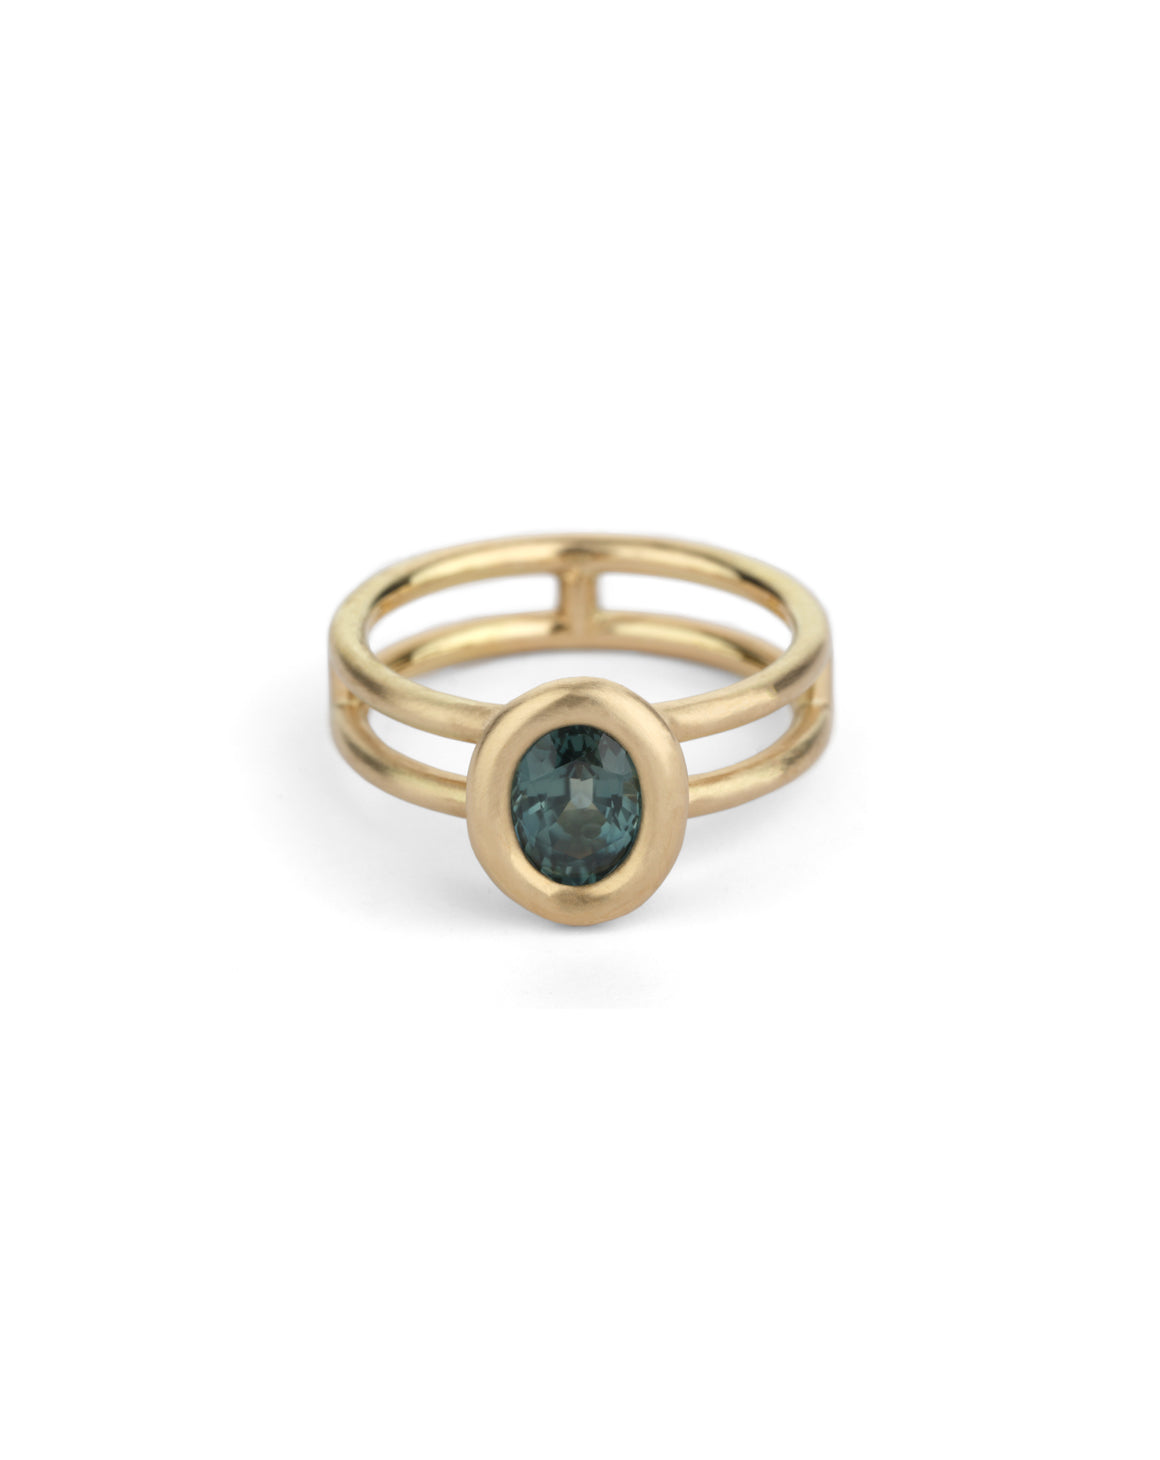 Teal Densissima Oval Ring